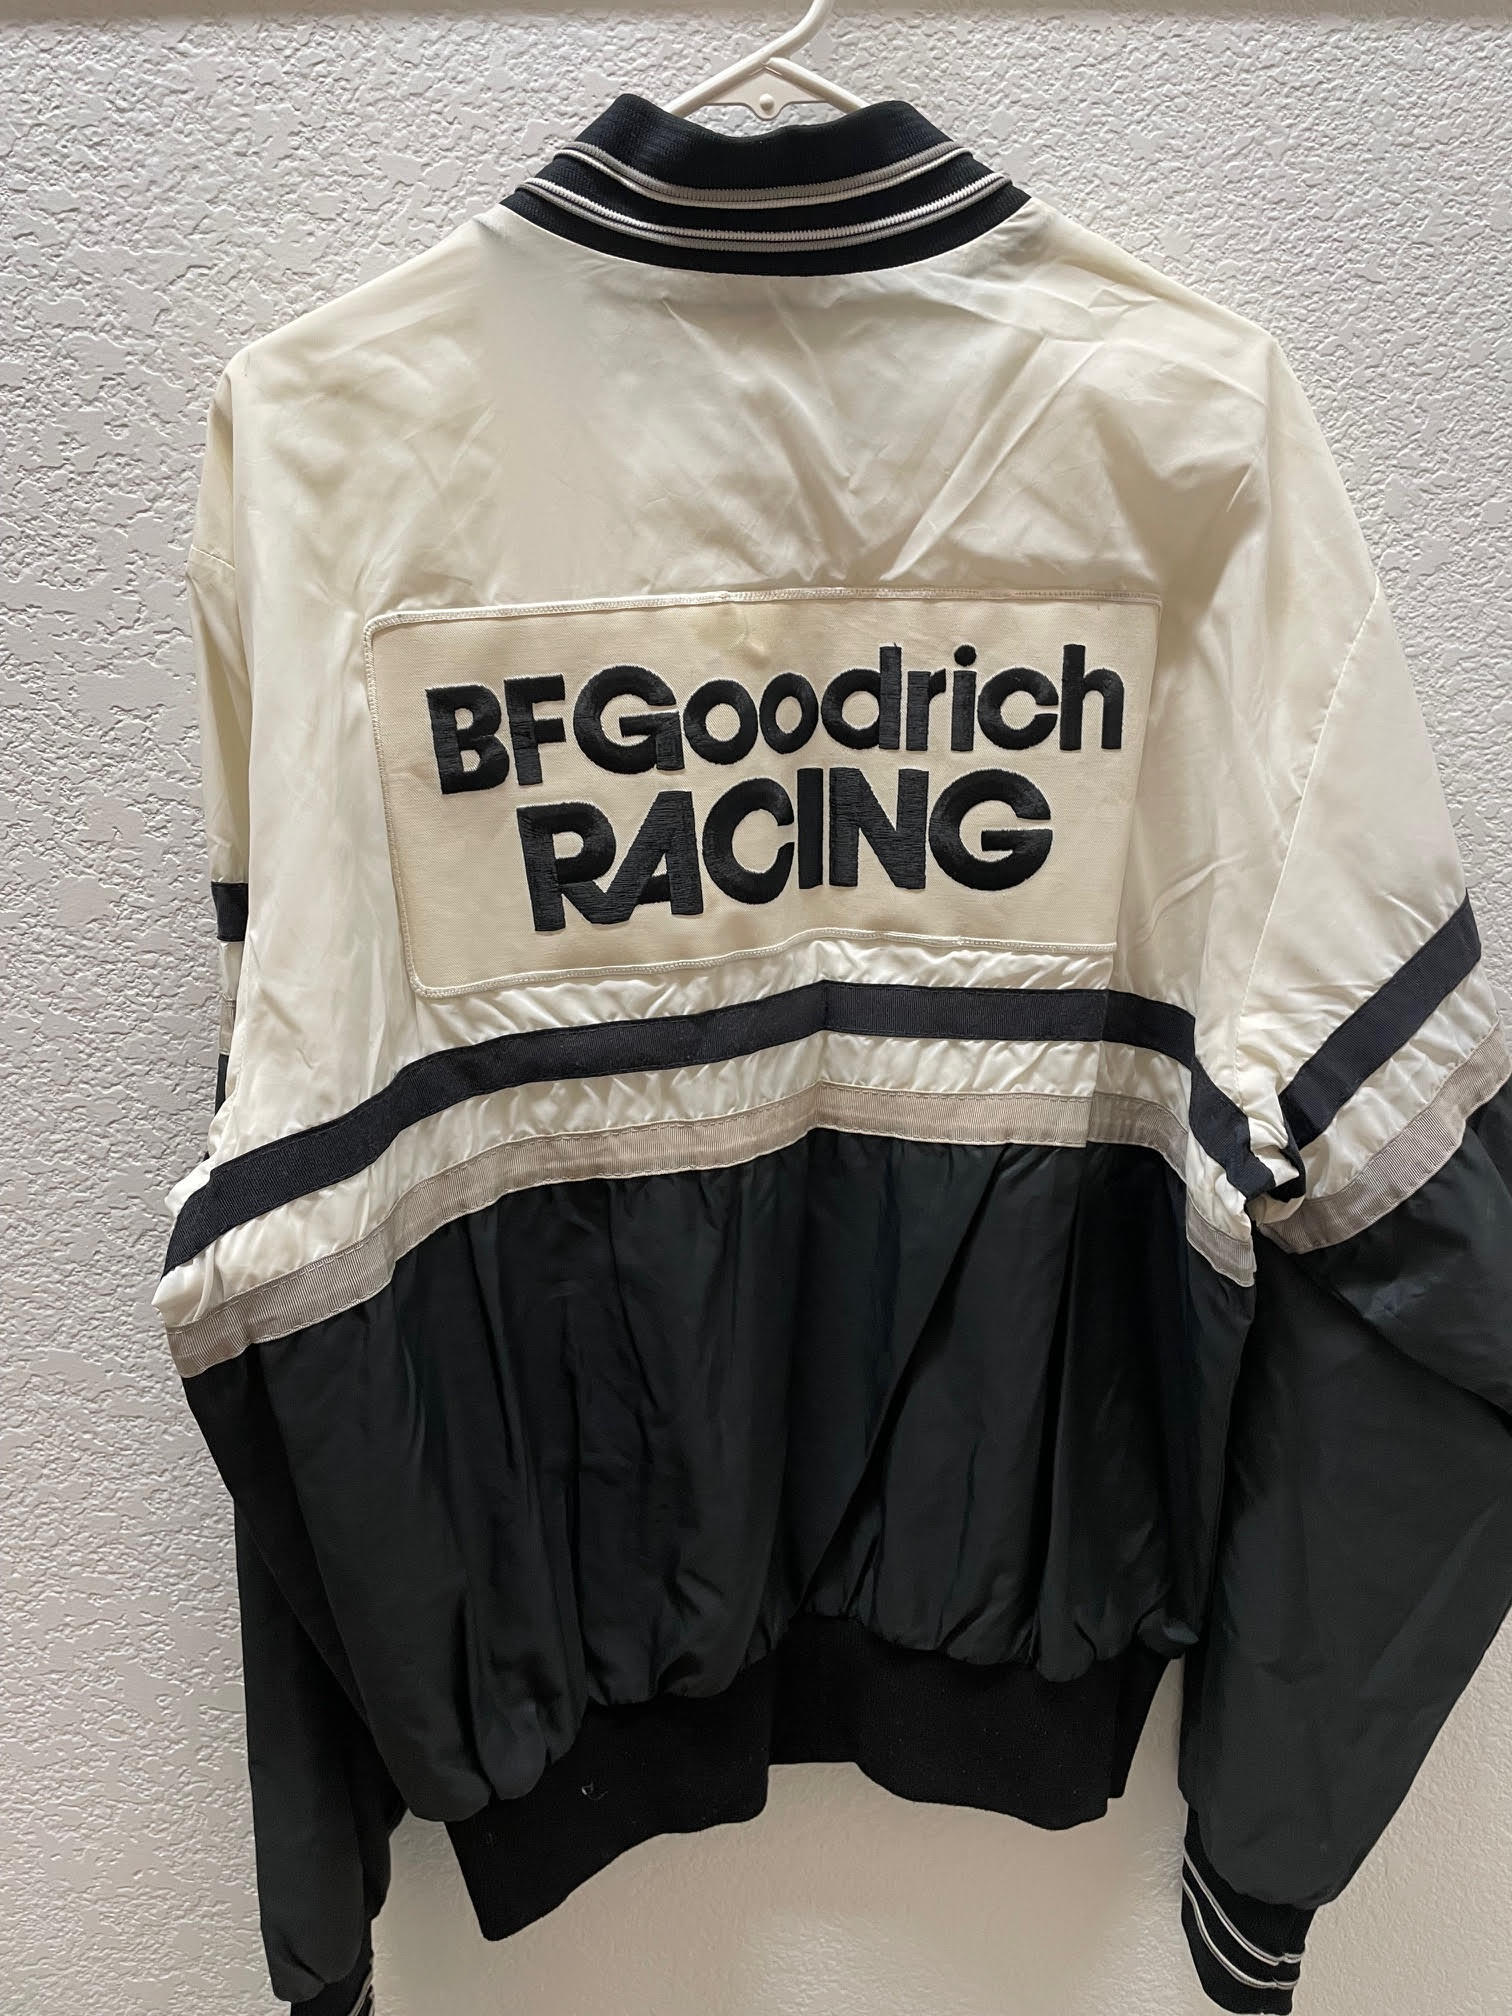 For Sale: Desert Racing Memorabilia Mostly Late 1970s -SOLD- - photo12